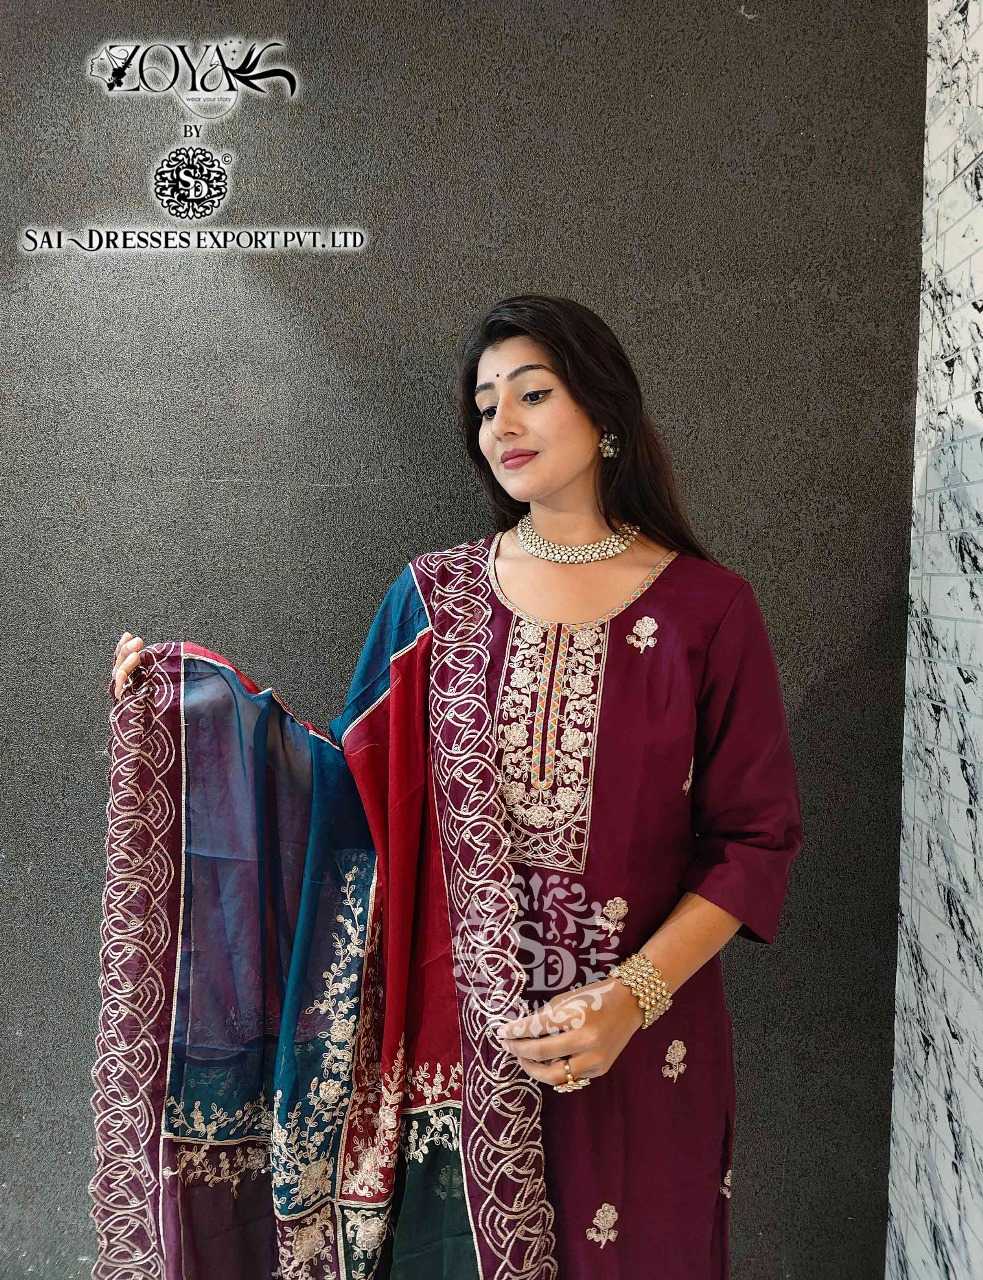 SAI DRESSES PRESENT D.NO SD1044 TO SD1047 READY TO EXCLUSIVE FESTIVE WEAR DESIGNER PAKISTANI 3 PIECE CONCEPT COMBO COLLECTION IN WHOLESALE RATE IN SURAT